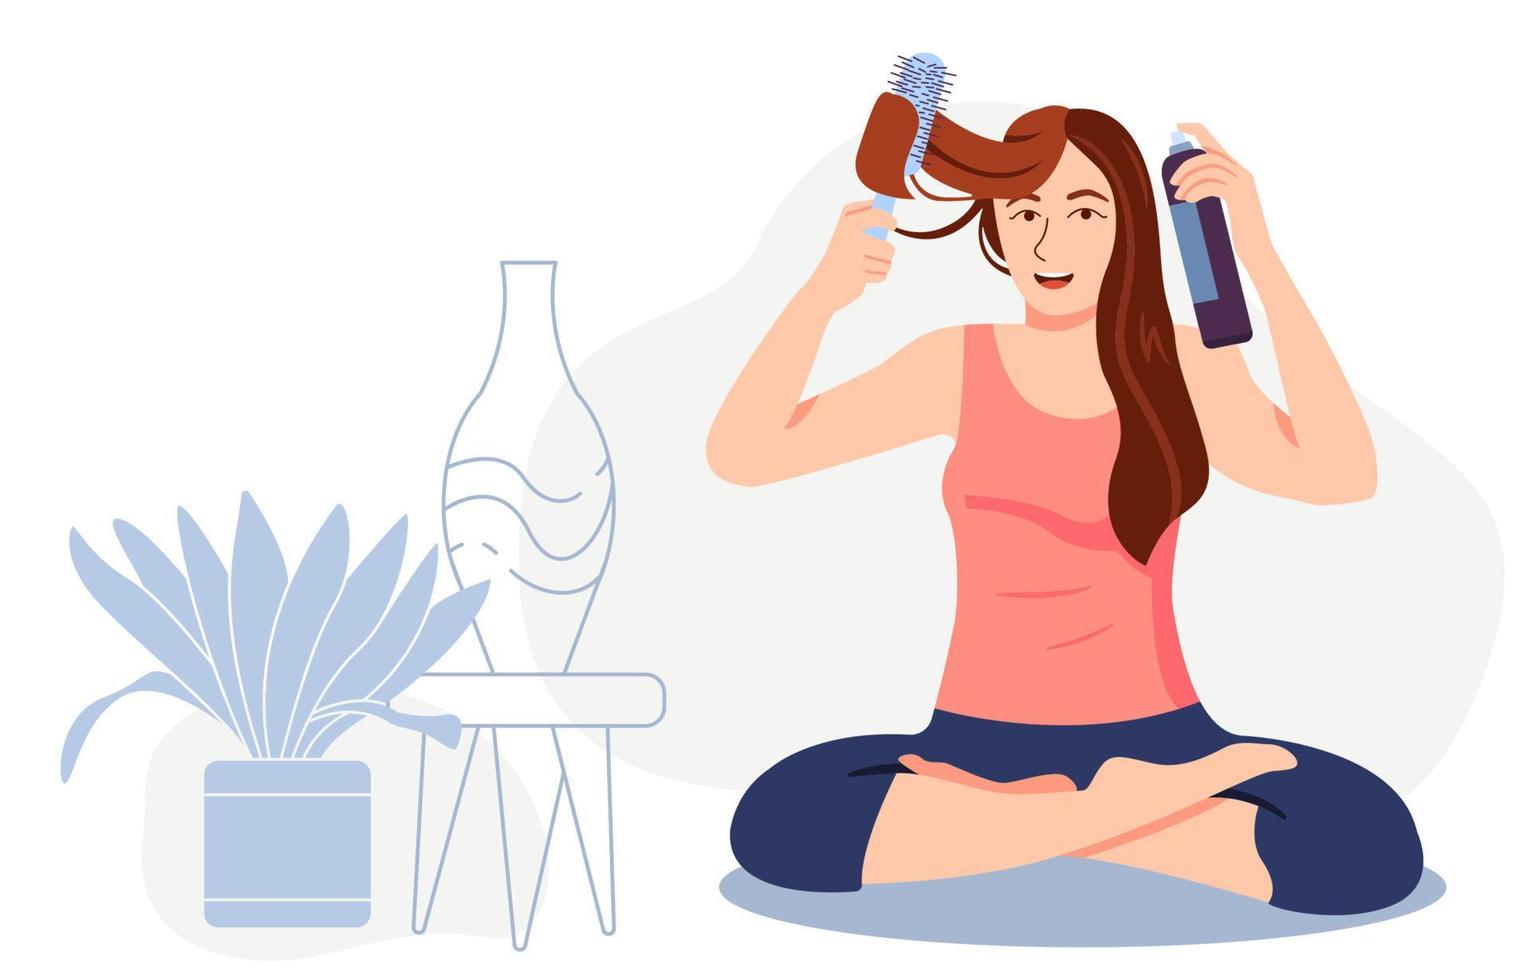 Woman holding iron curling hair ,beauty treatment, Girls Make Hairstyles Flat Vector Illustration.